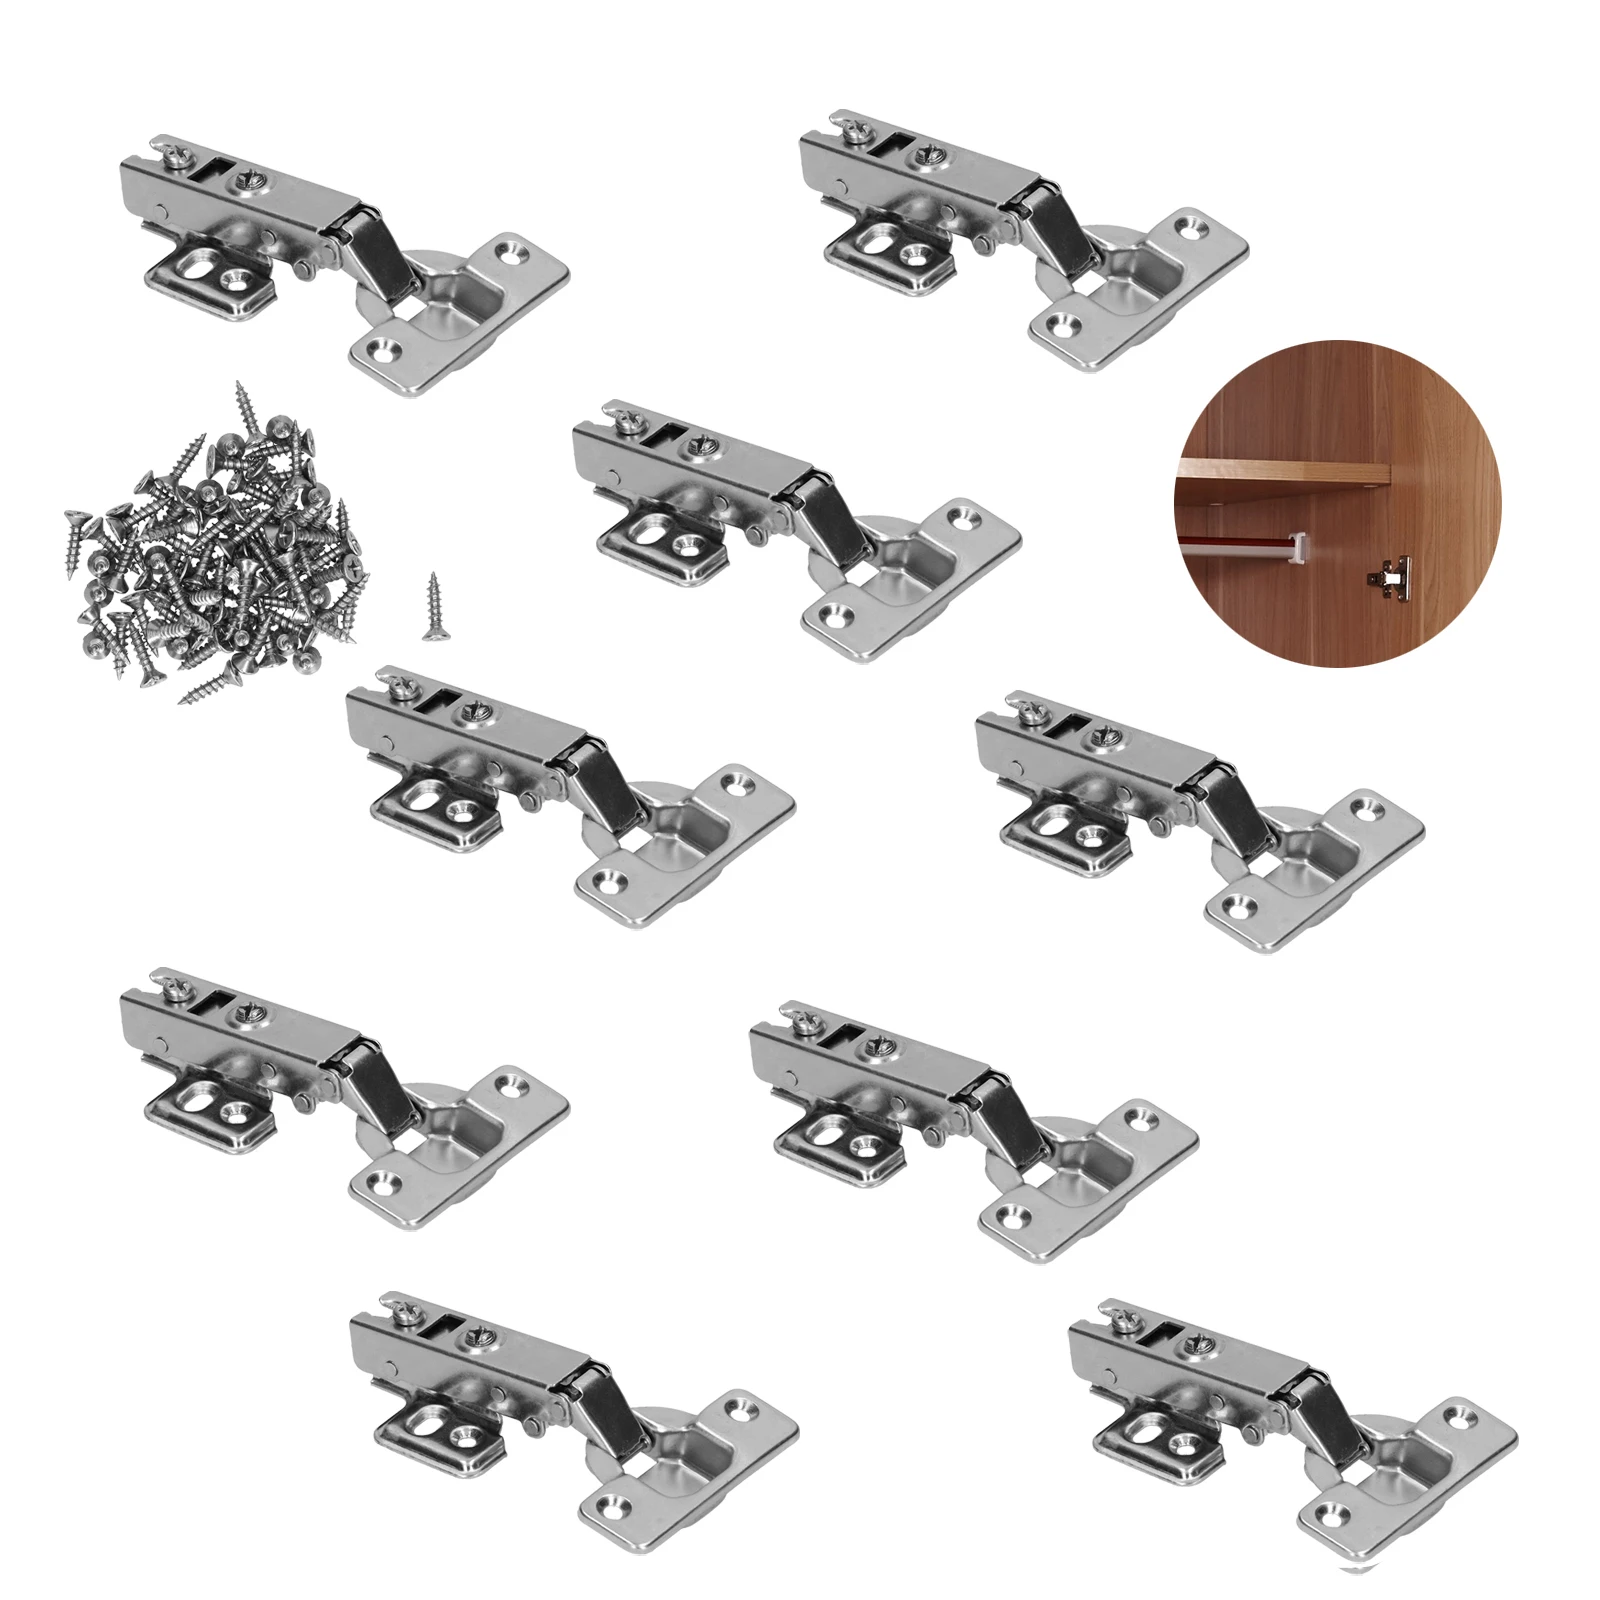 

8X Small Hinges Soft Close Door Concealed Hinge Damping Hydraulic Hinges Furniture Hardware Display Cabinet 35mm Cup Diameter